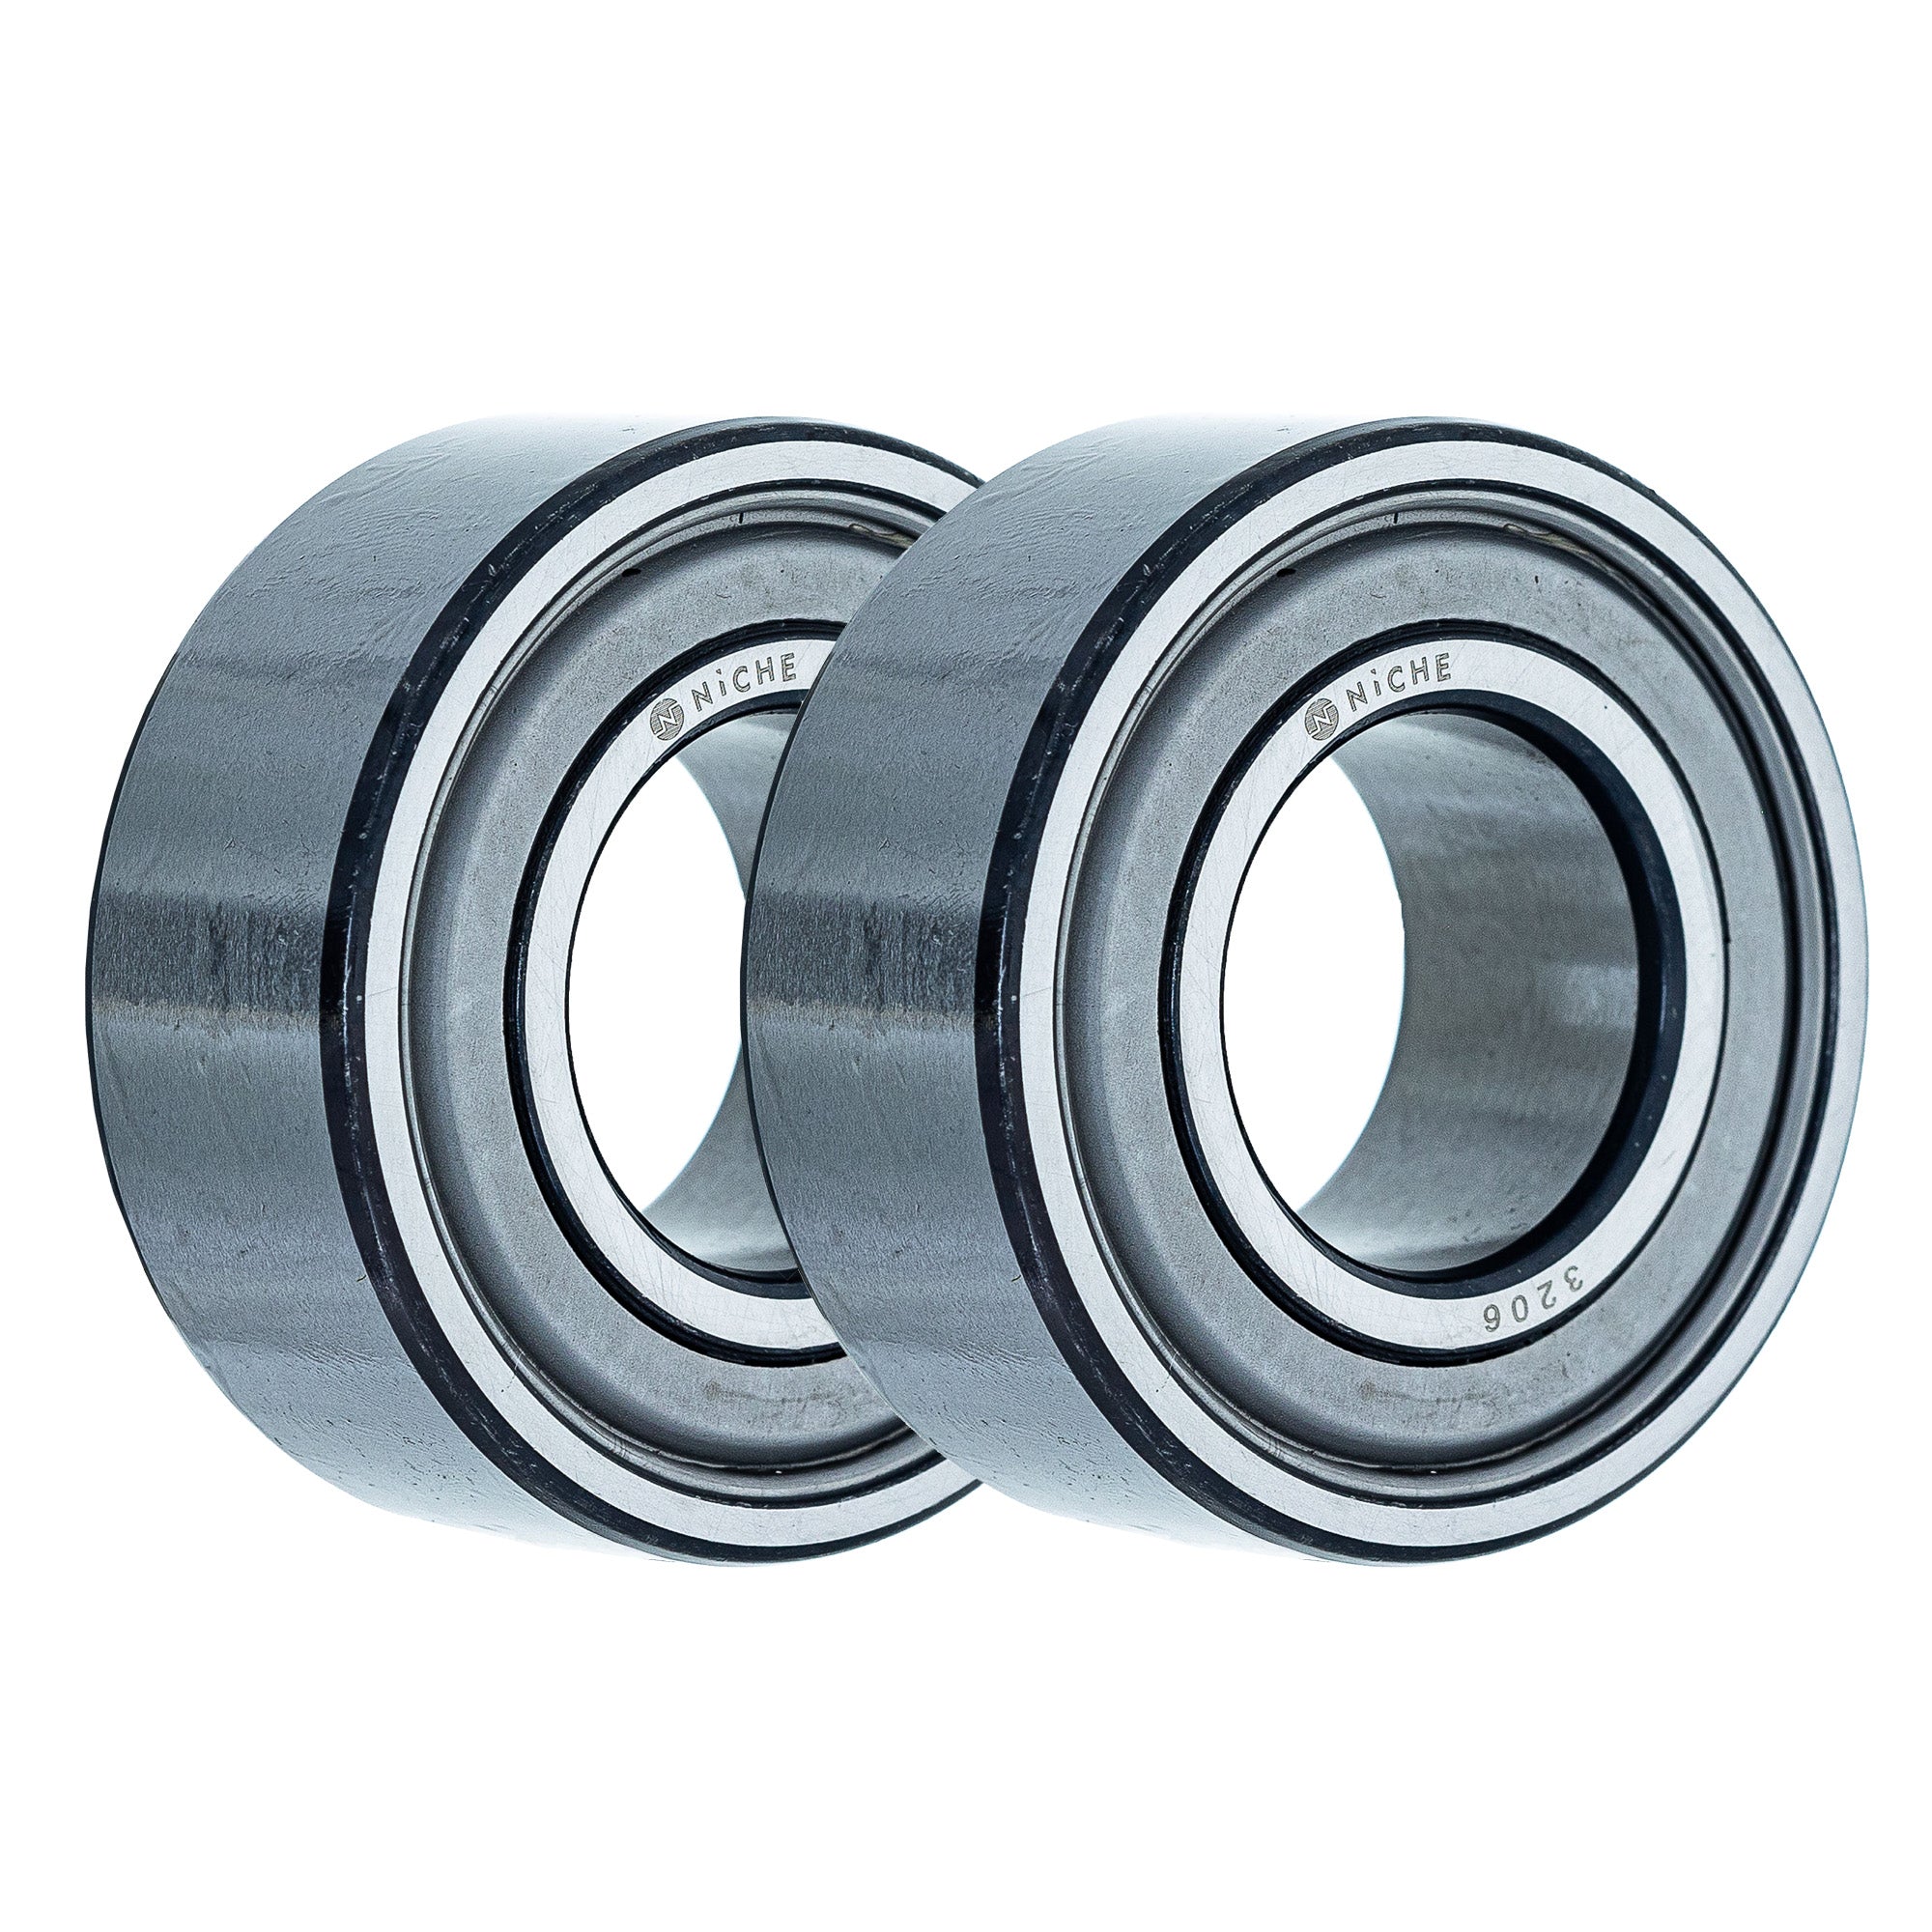 Double Row, Angular Contact, Ball Bearing Pack of 2 2-Pack for zOTHER Teryx4 NICHE 519-CBB2297R